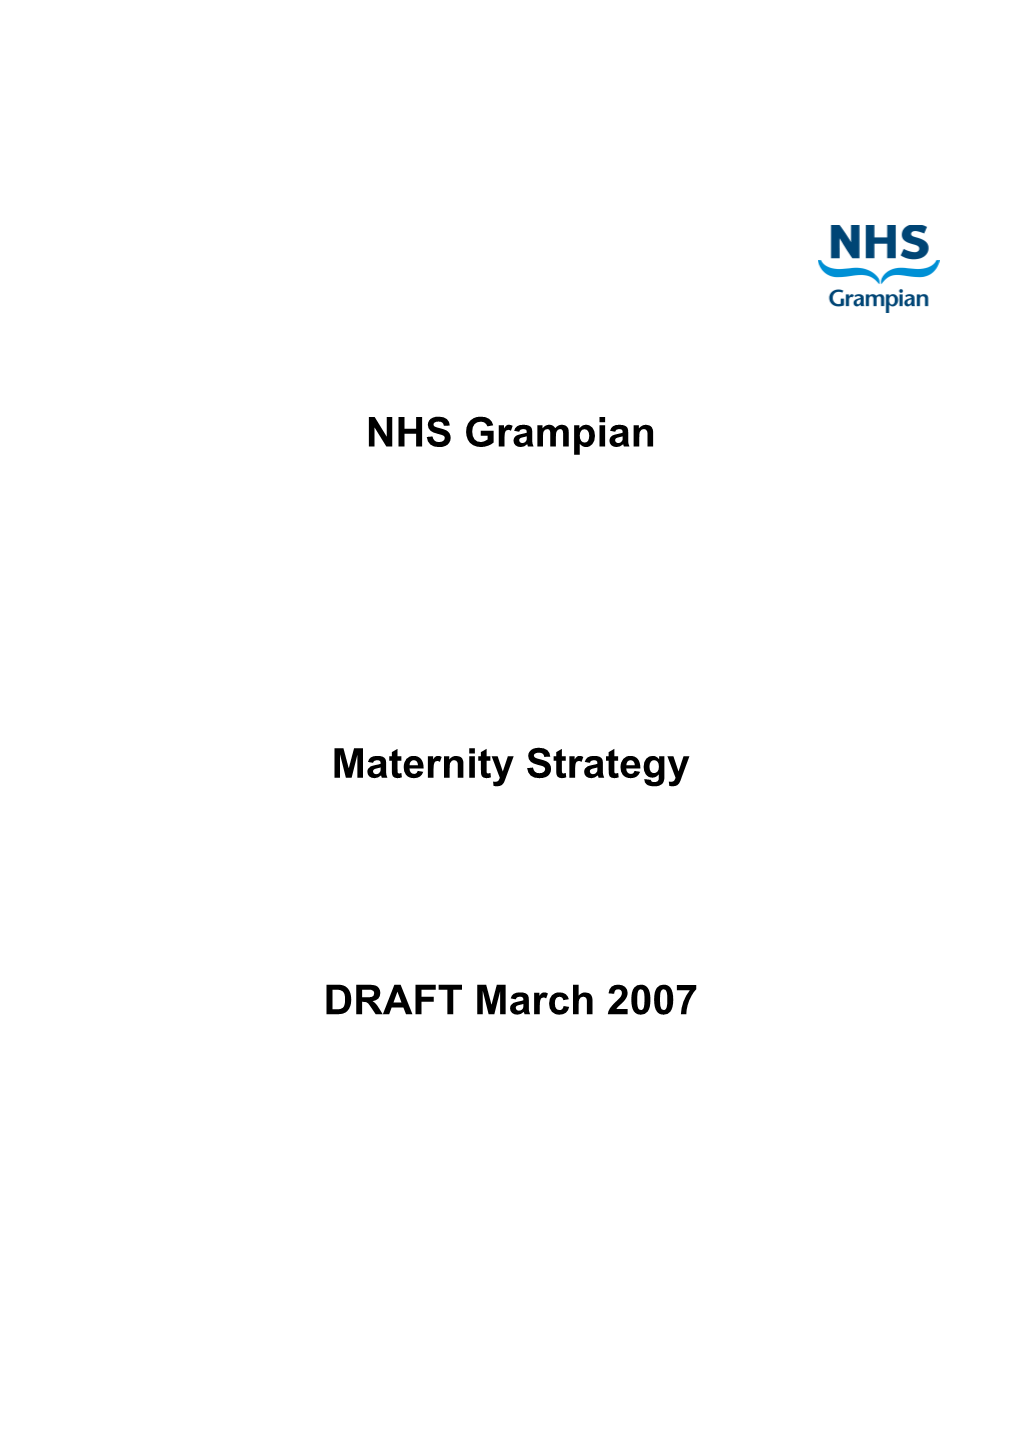 Maternity Strategy for Grampian